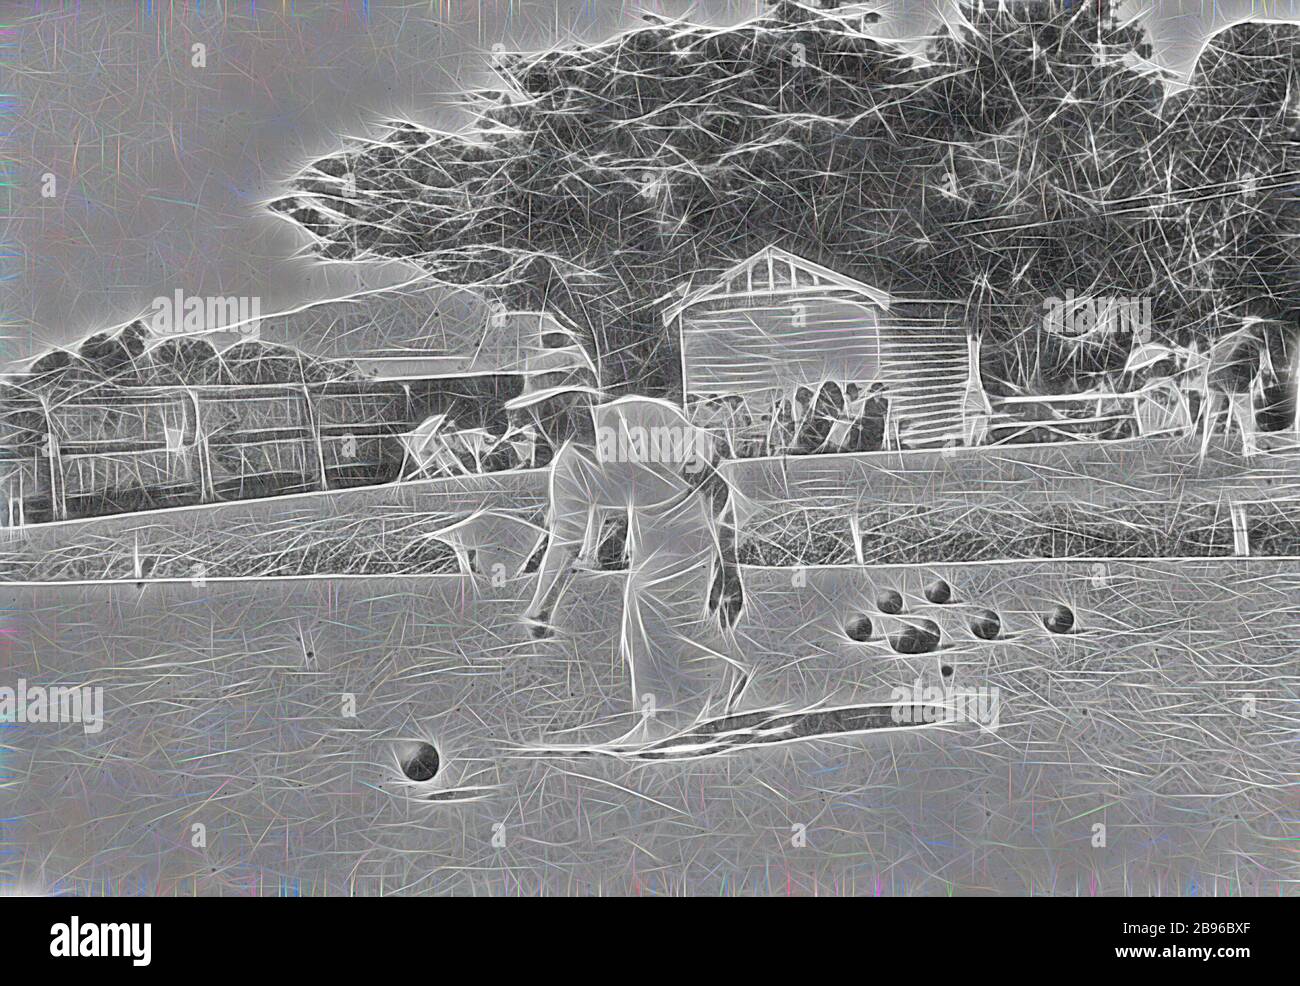 Negative - Man Playing Bowls at 'Erskine House', Lorne, Victoria, 1920, A man playing bowls at 'Erskine House'. A small group of people watch in the background., Reimagined by Gibon, design of warm cheerful glowing of brightness and light rays radiance. Classic art reinvented with a modern twist. Photography inspired by futurism, embracing dynamic energy of modern technology, movement, speed and revolutionize culture. Stock Photo